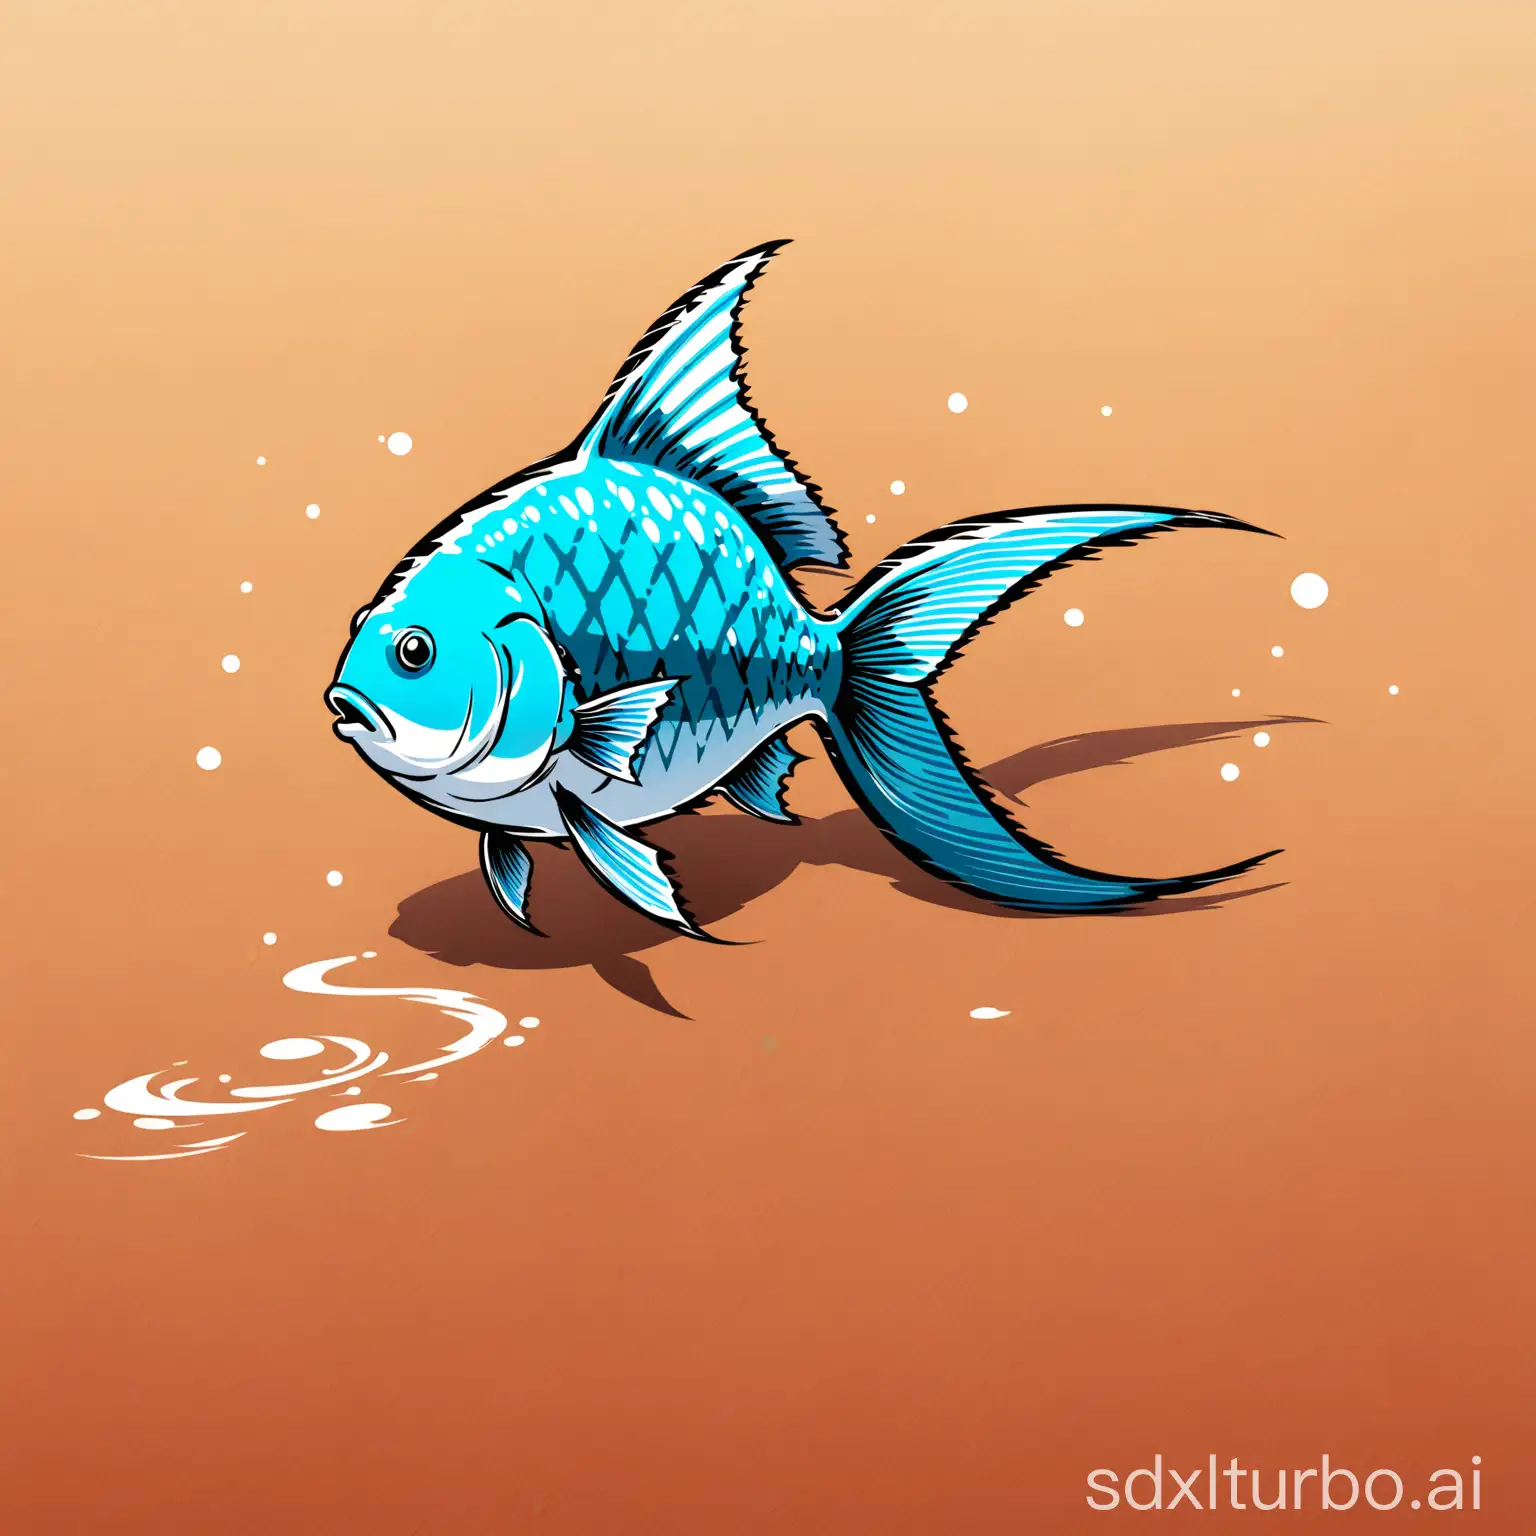 The fish walking on the ground